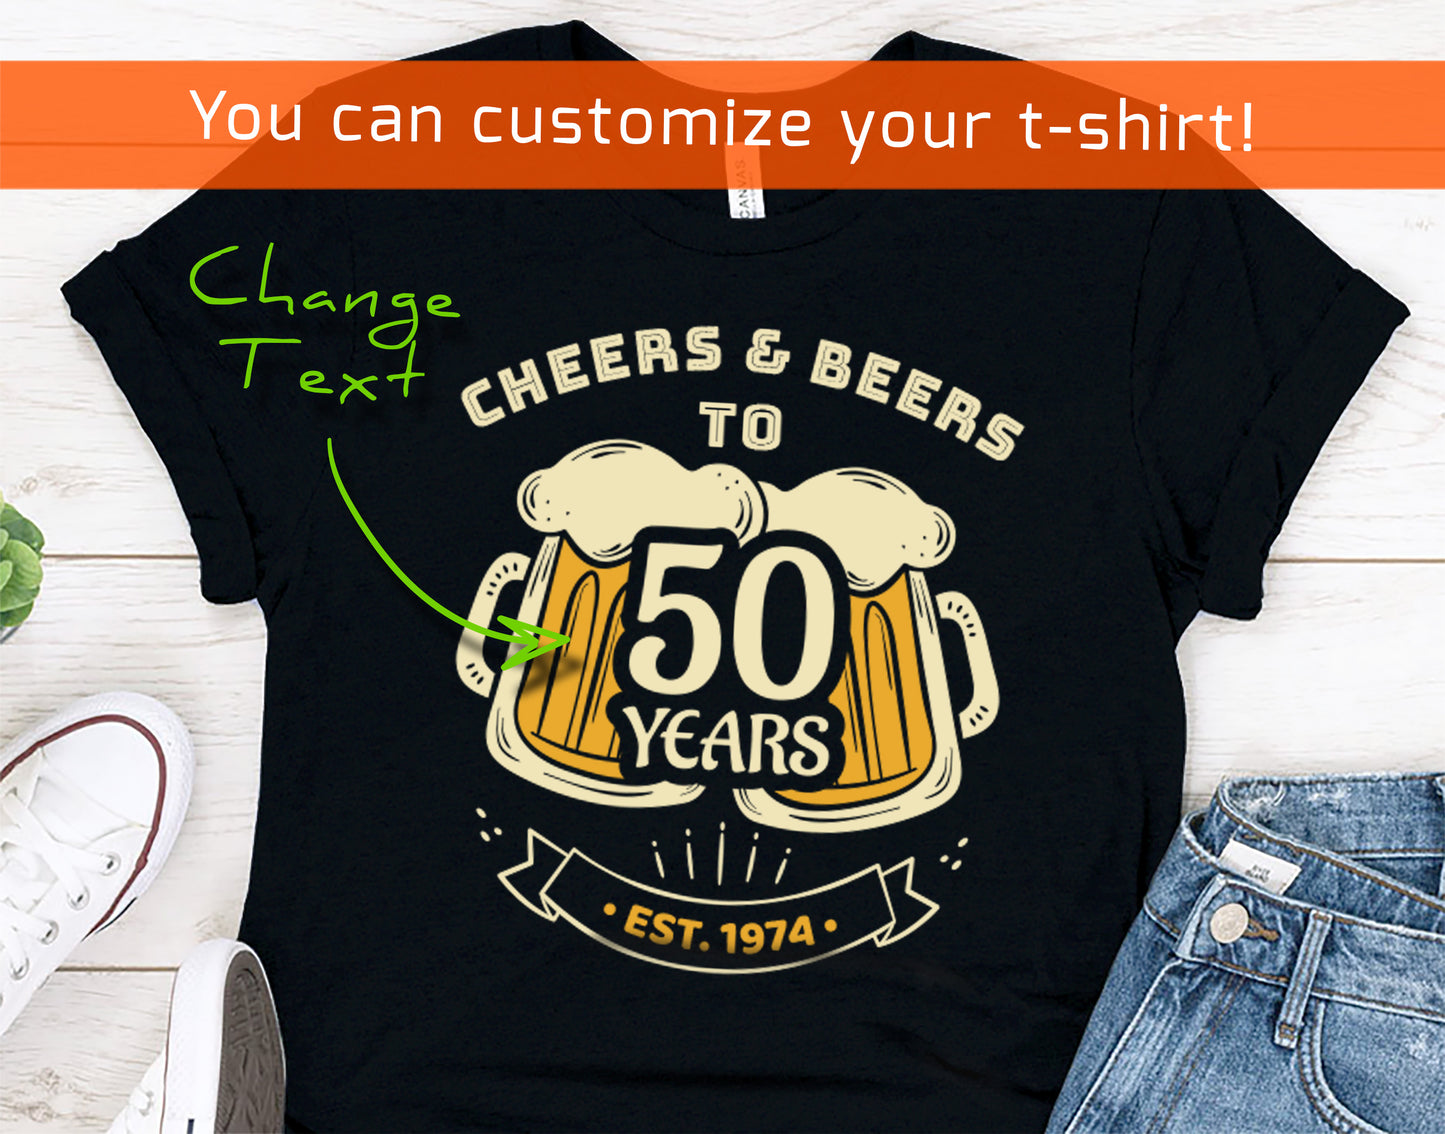 50th Birthday Gift Shirt for Men or Women - Cheers and Beers to 50 Years tee for Wife or Husband